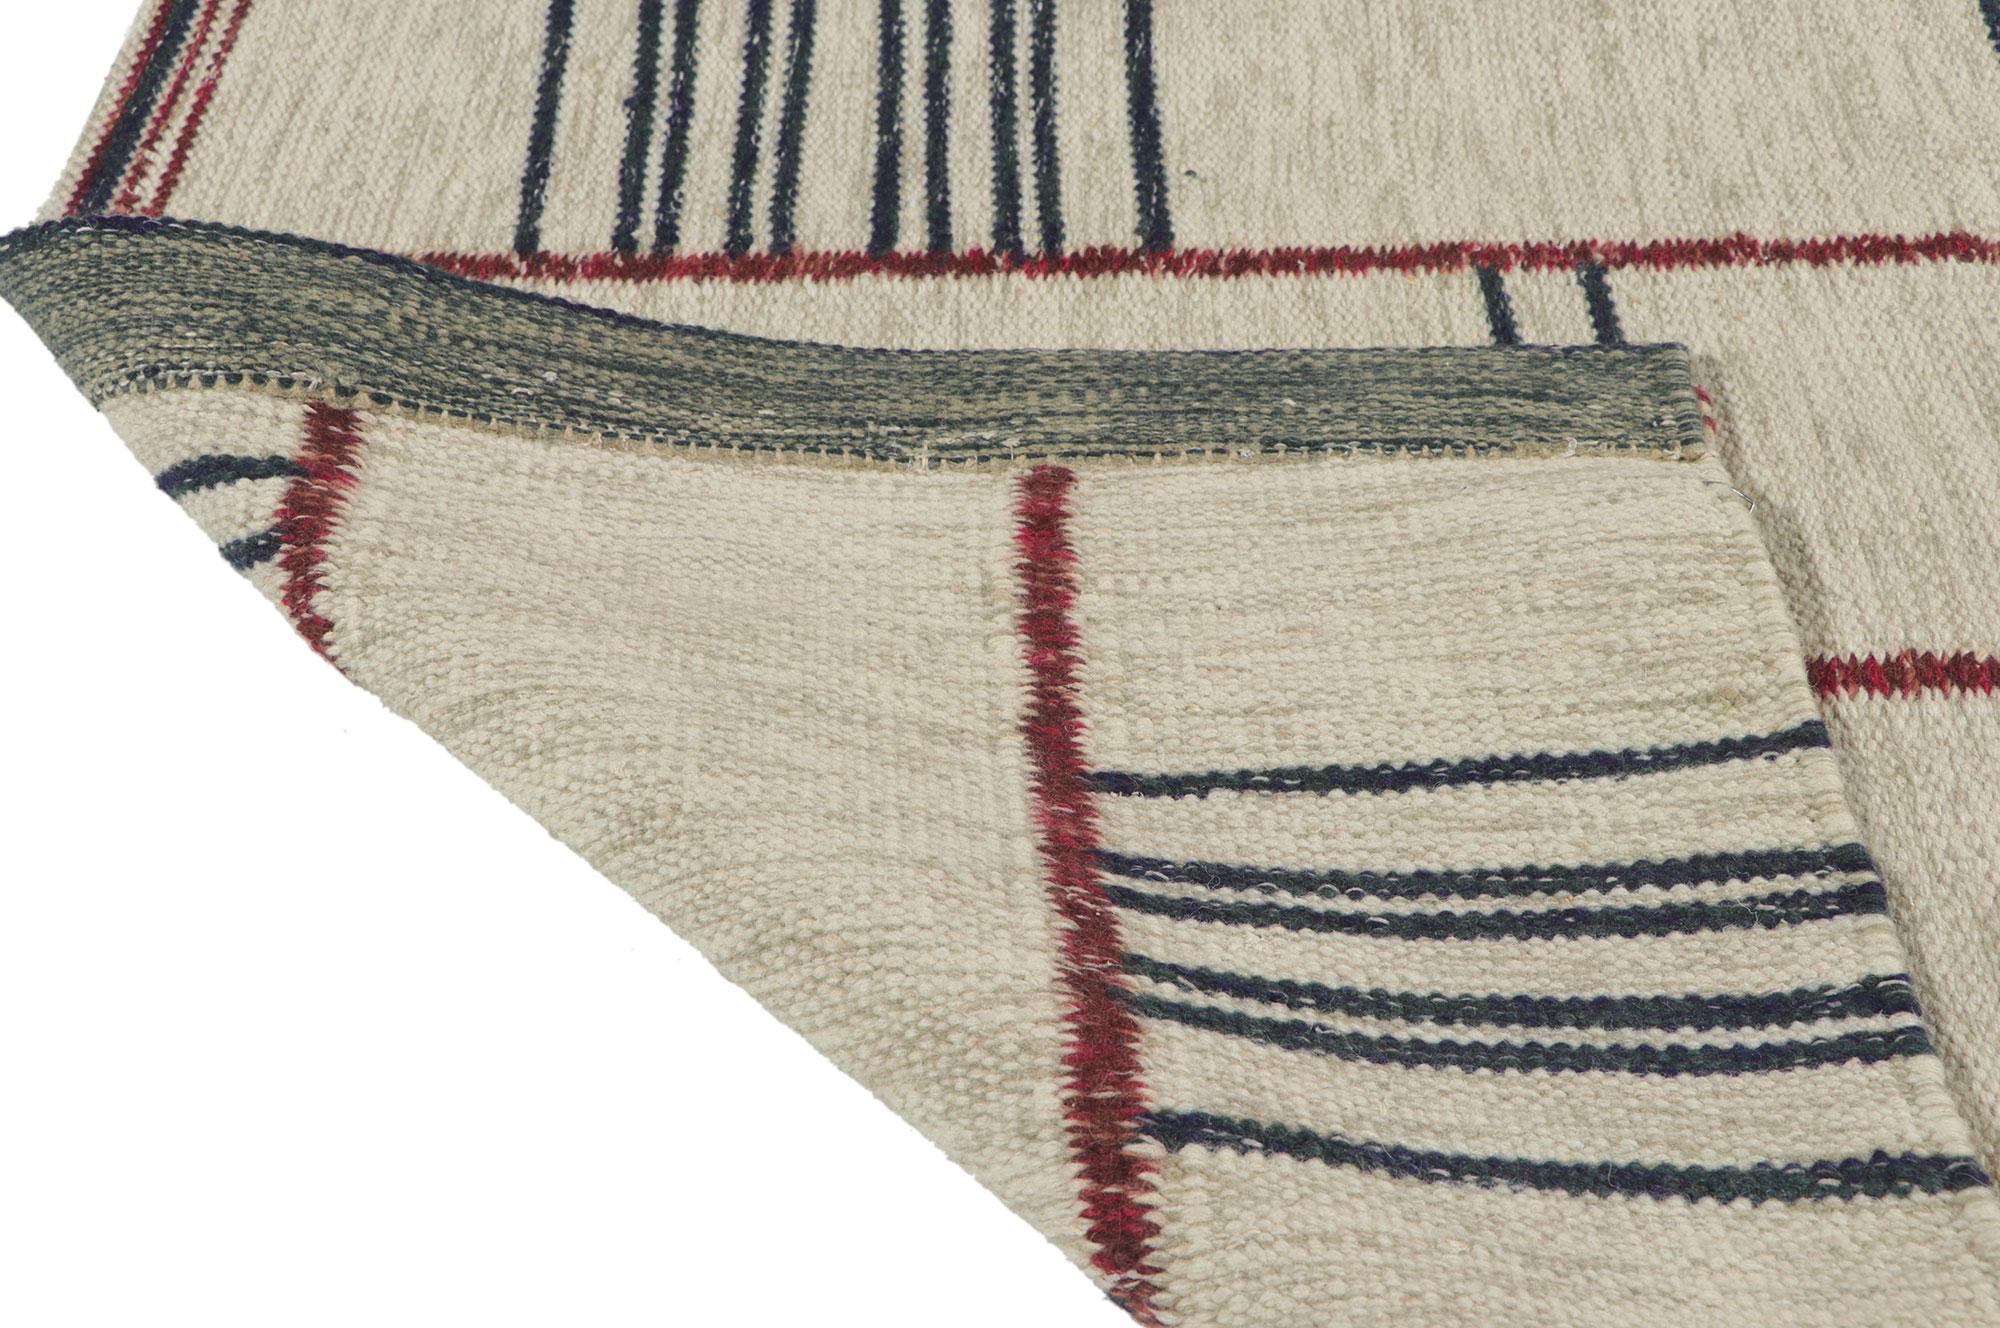 Swedish Inspired Kilim Rug, Scandinavian Modern Meets Sublime Simplicity In New Condition For Sale In Dallas, TX